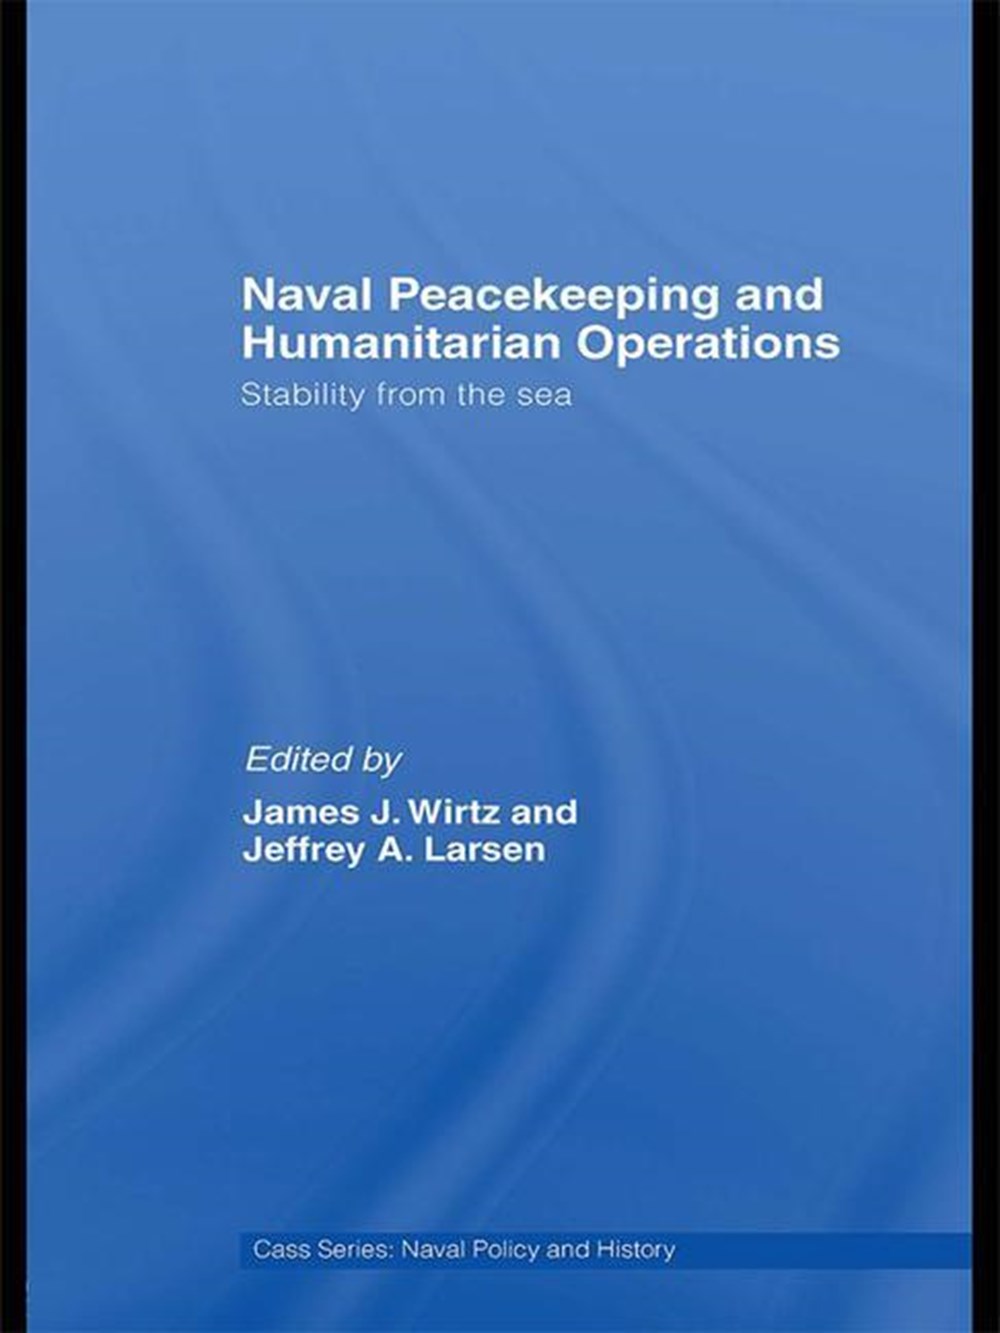 Naval Peacekeeping and Humanitarian Operations: Stability from the Sea